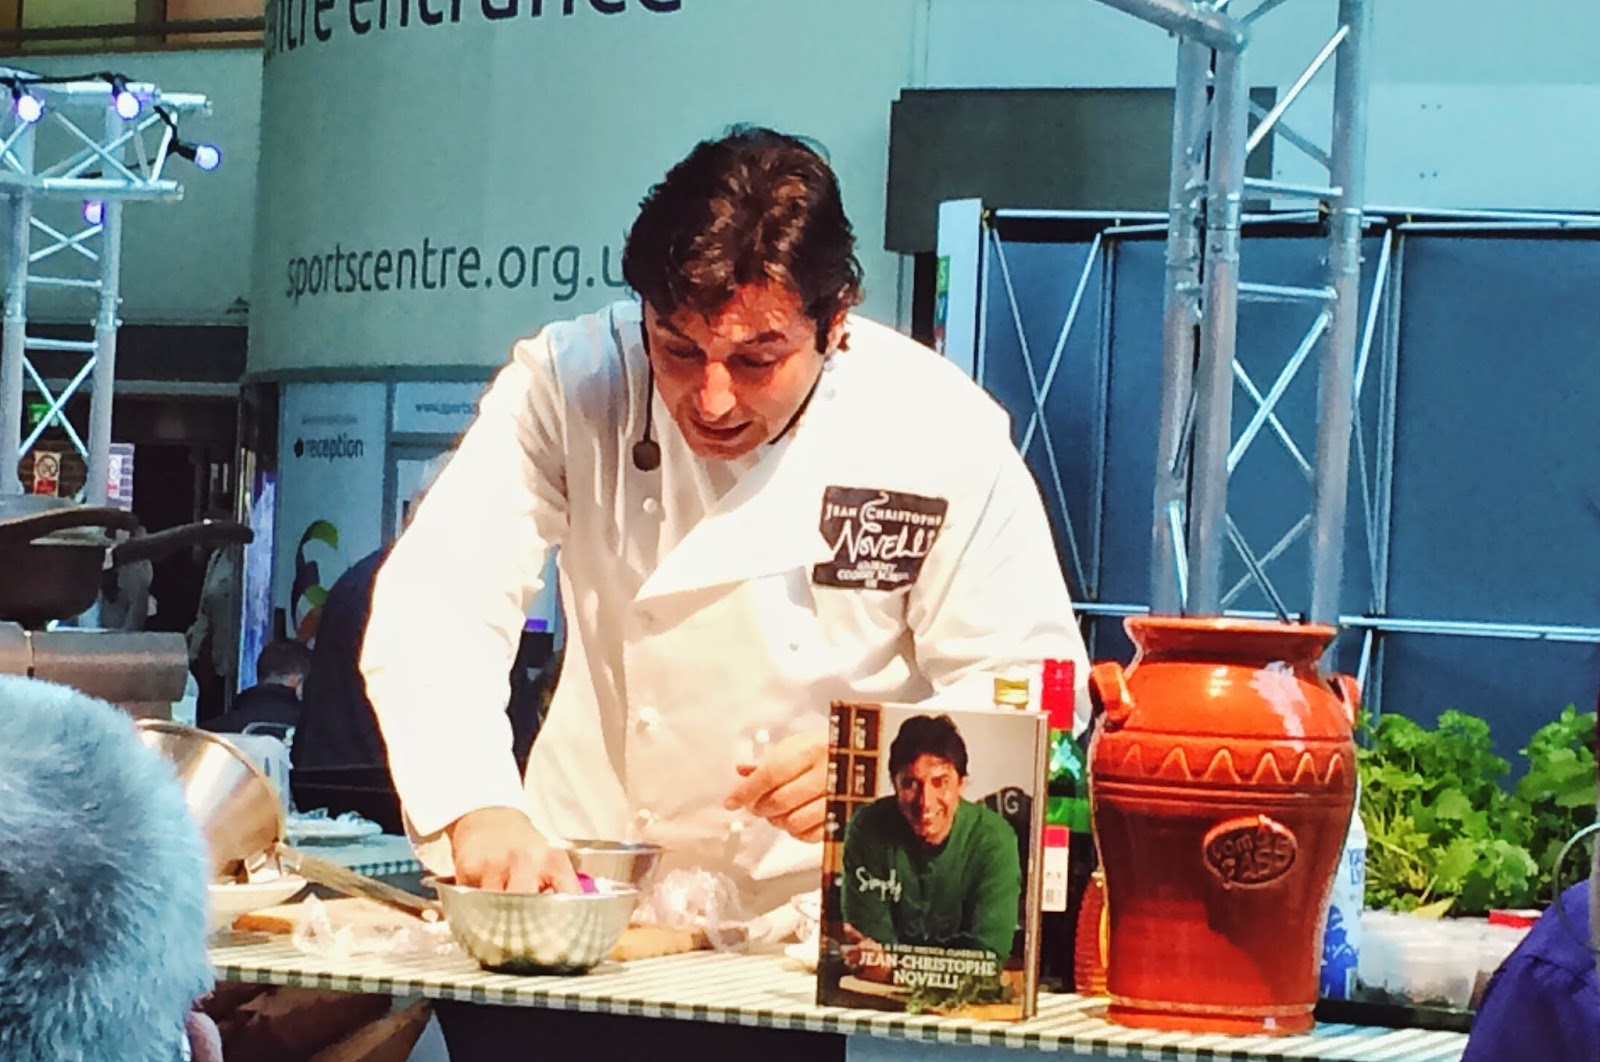 FashionFake, a UK fashion and lifestyle blog. Read my review of Eat Street, an event which celebrates the best of Basingstoke Festival Places' restaurants and eateries, with celebrity chef appearance by Jean-Christophe Novelli.